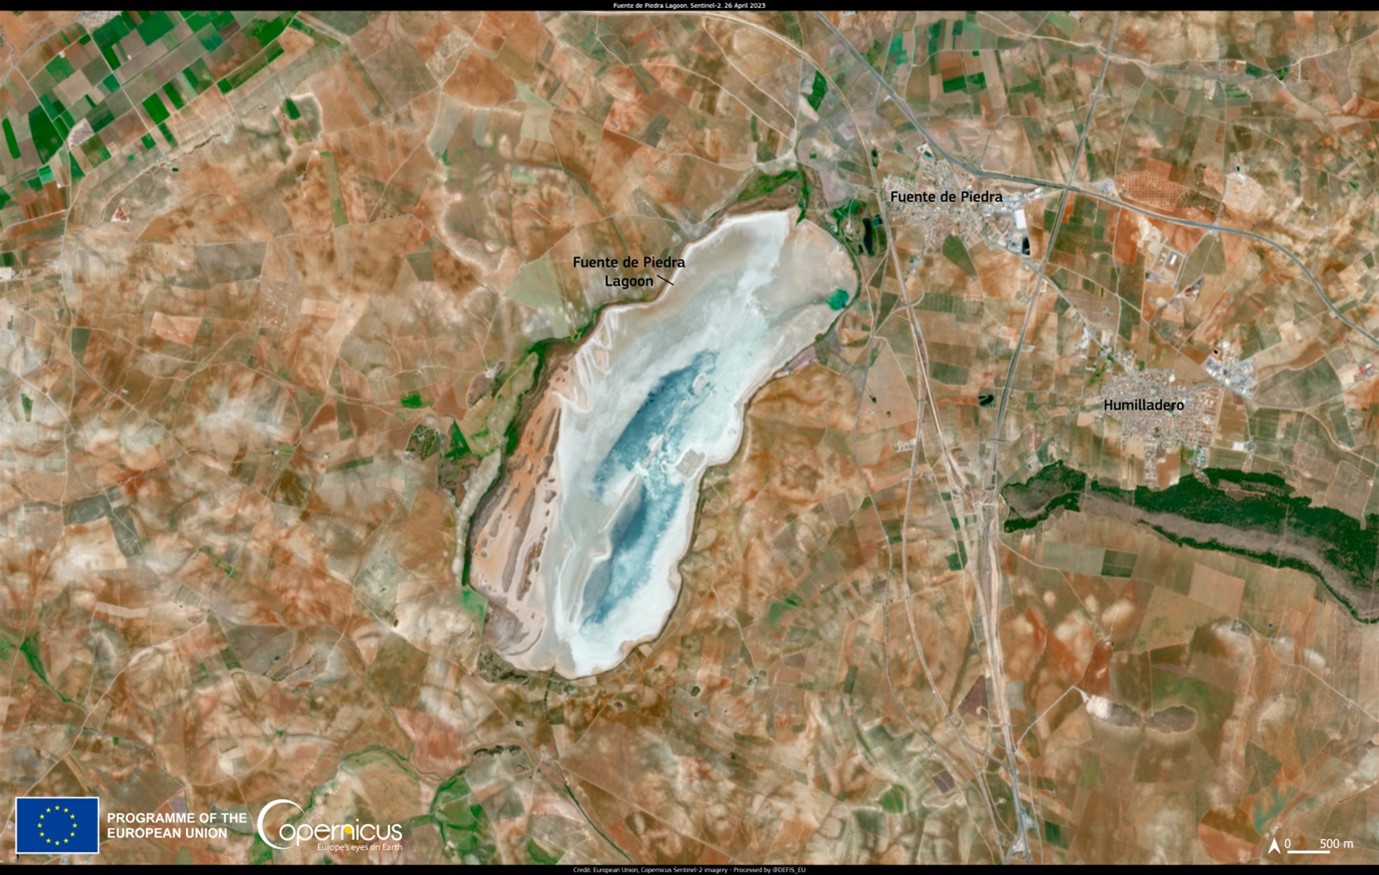 European Union, Copernicus Sentinel-2 imagery taken on 26 April 2023 shows that Fuente de Piedra, a famous lake in Andalusia, is completely dry